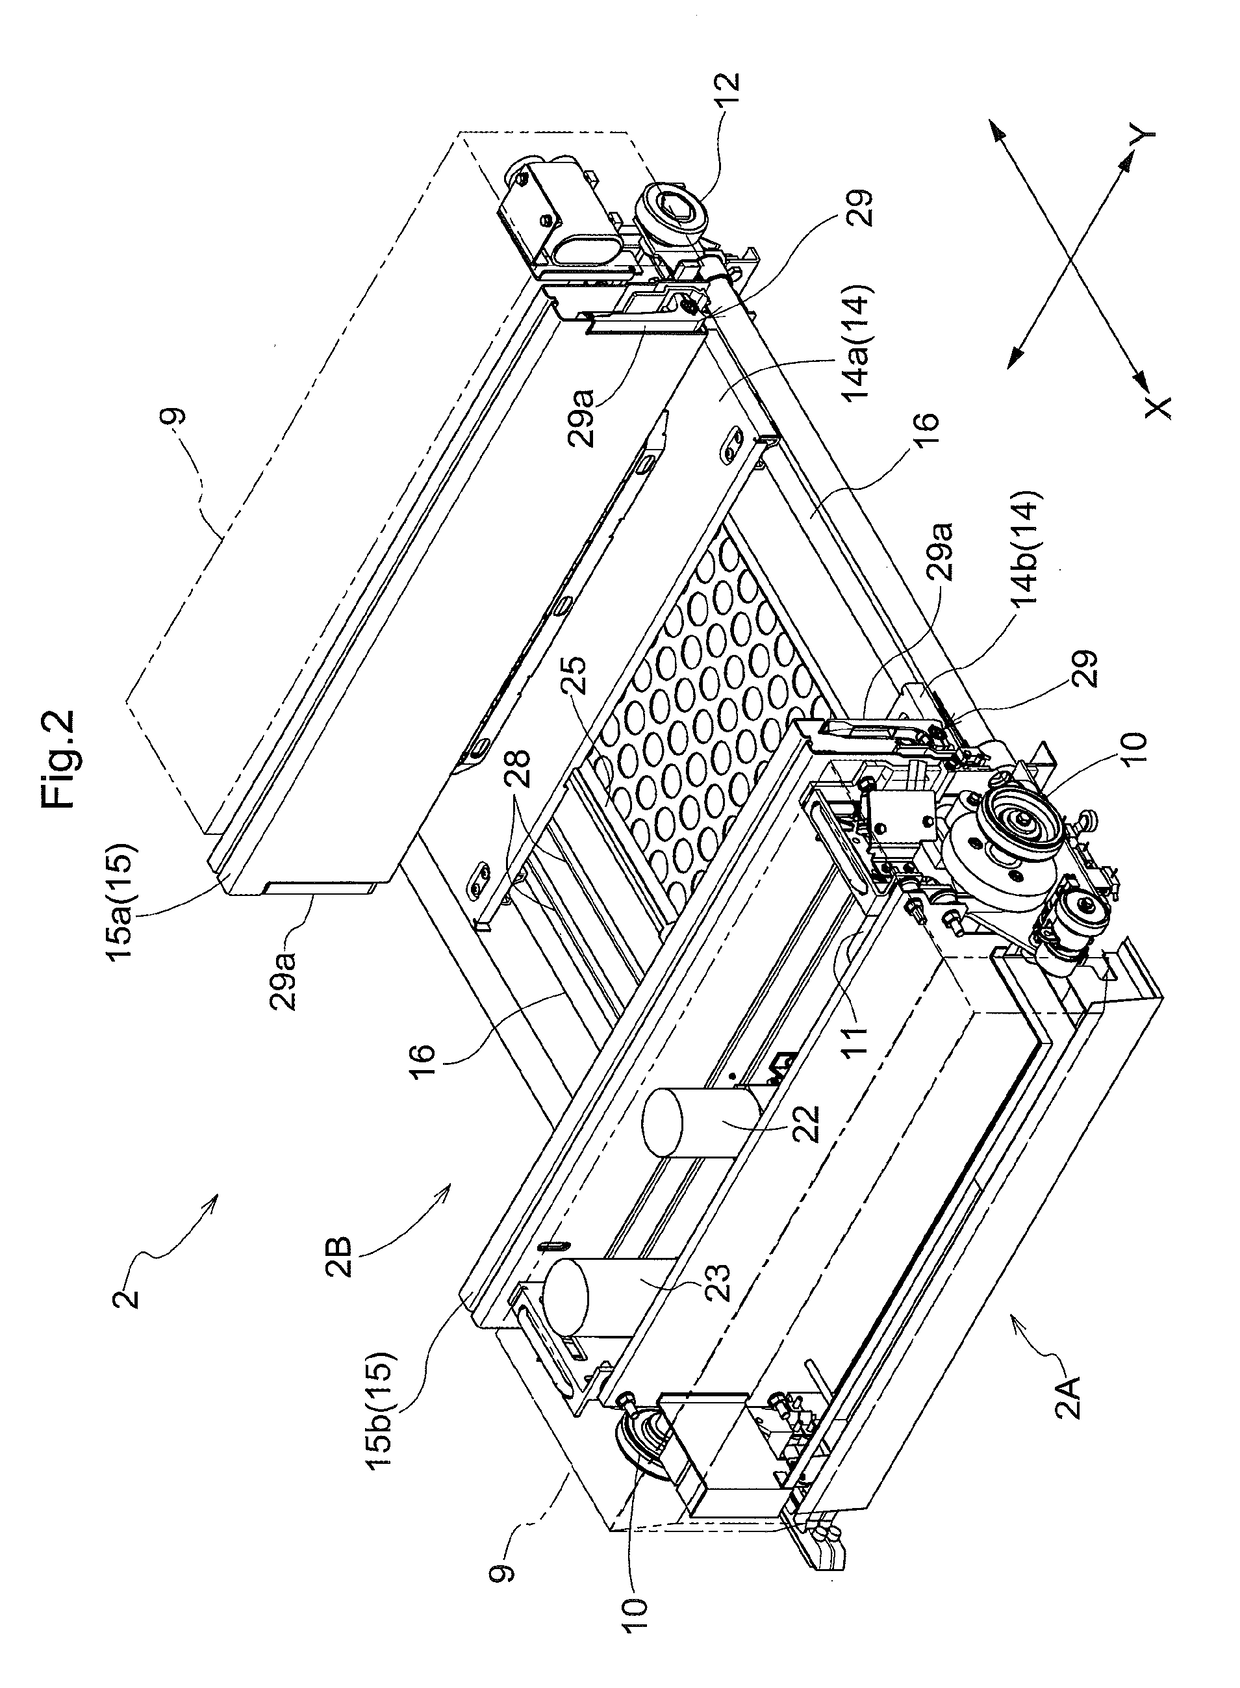 Article Transfer Device and Article Transport Facility